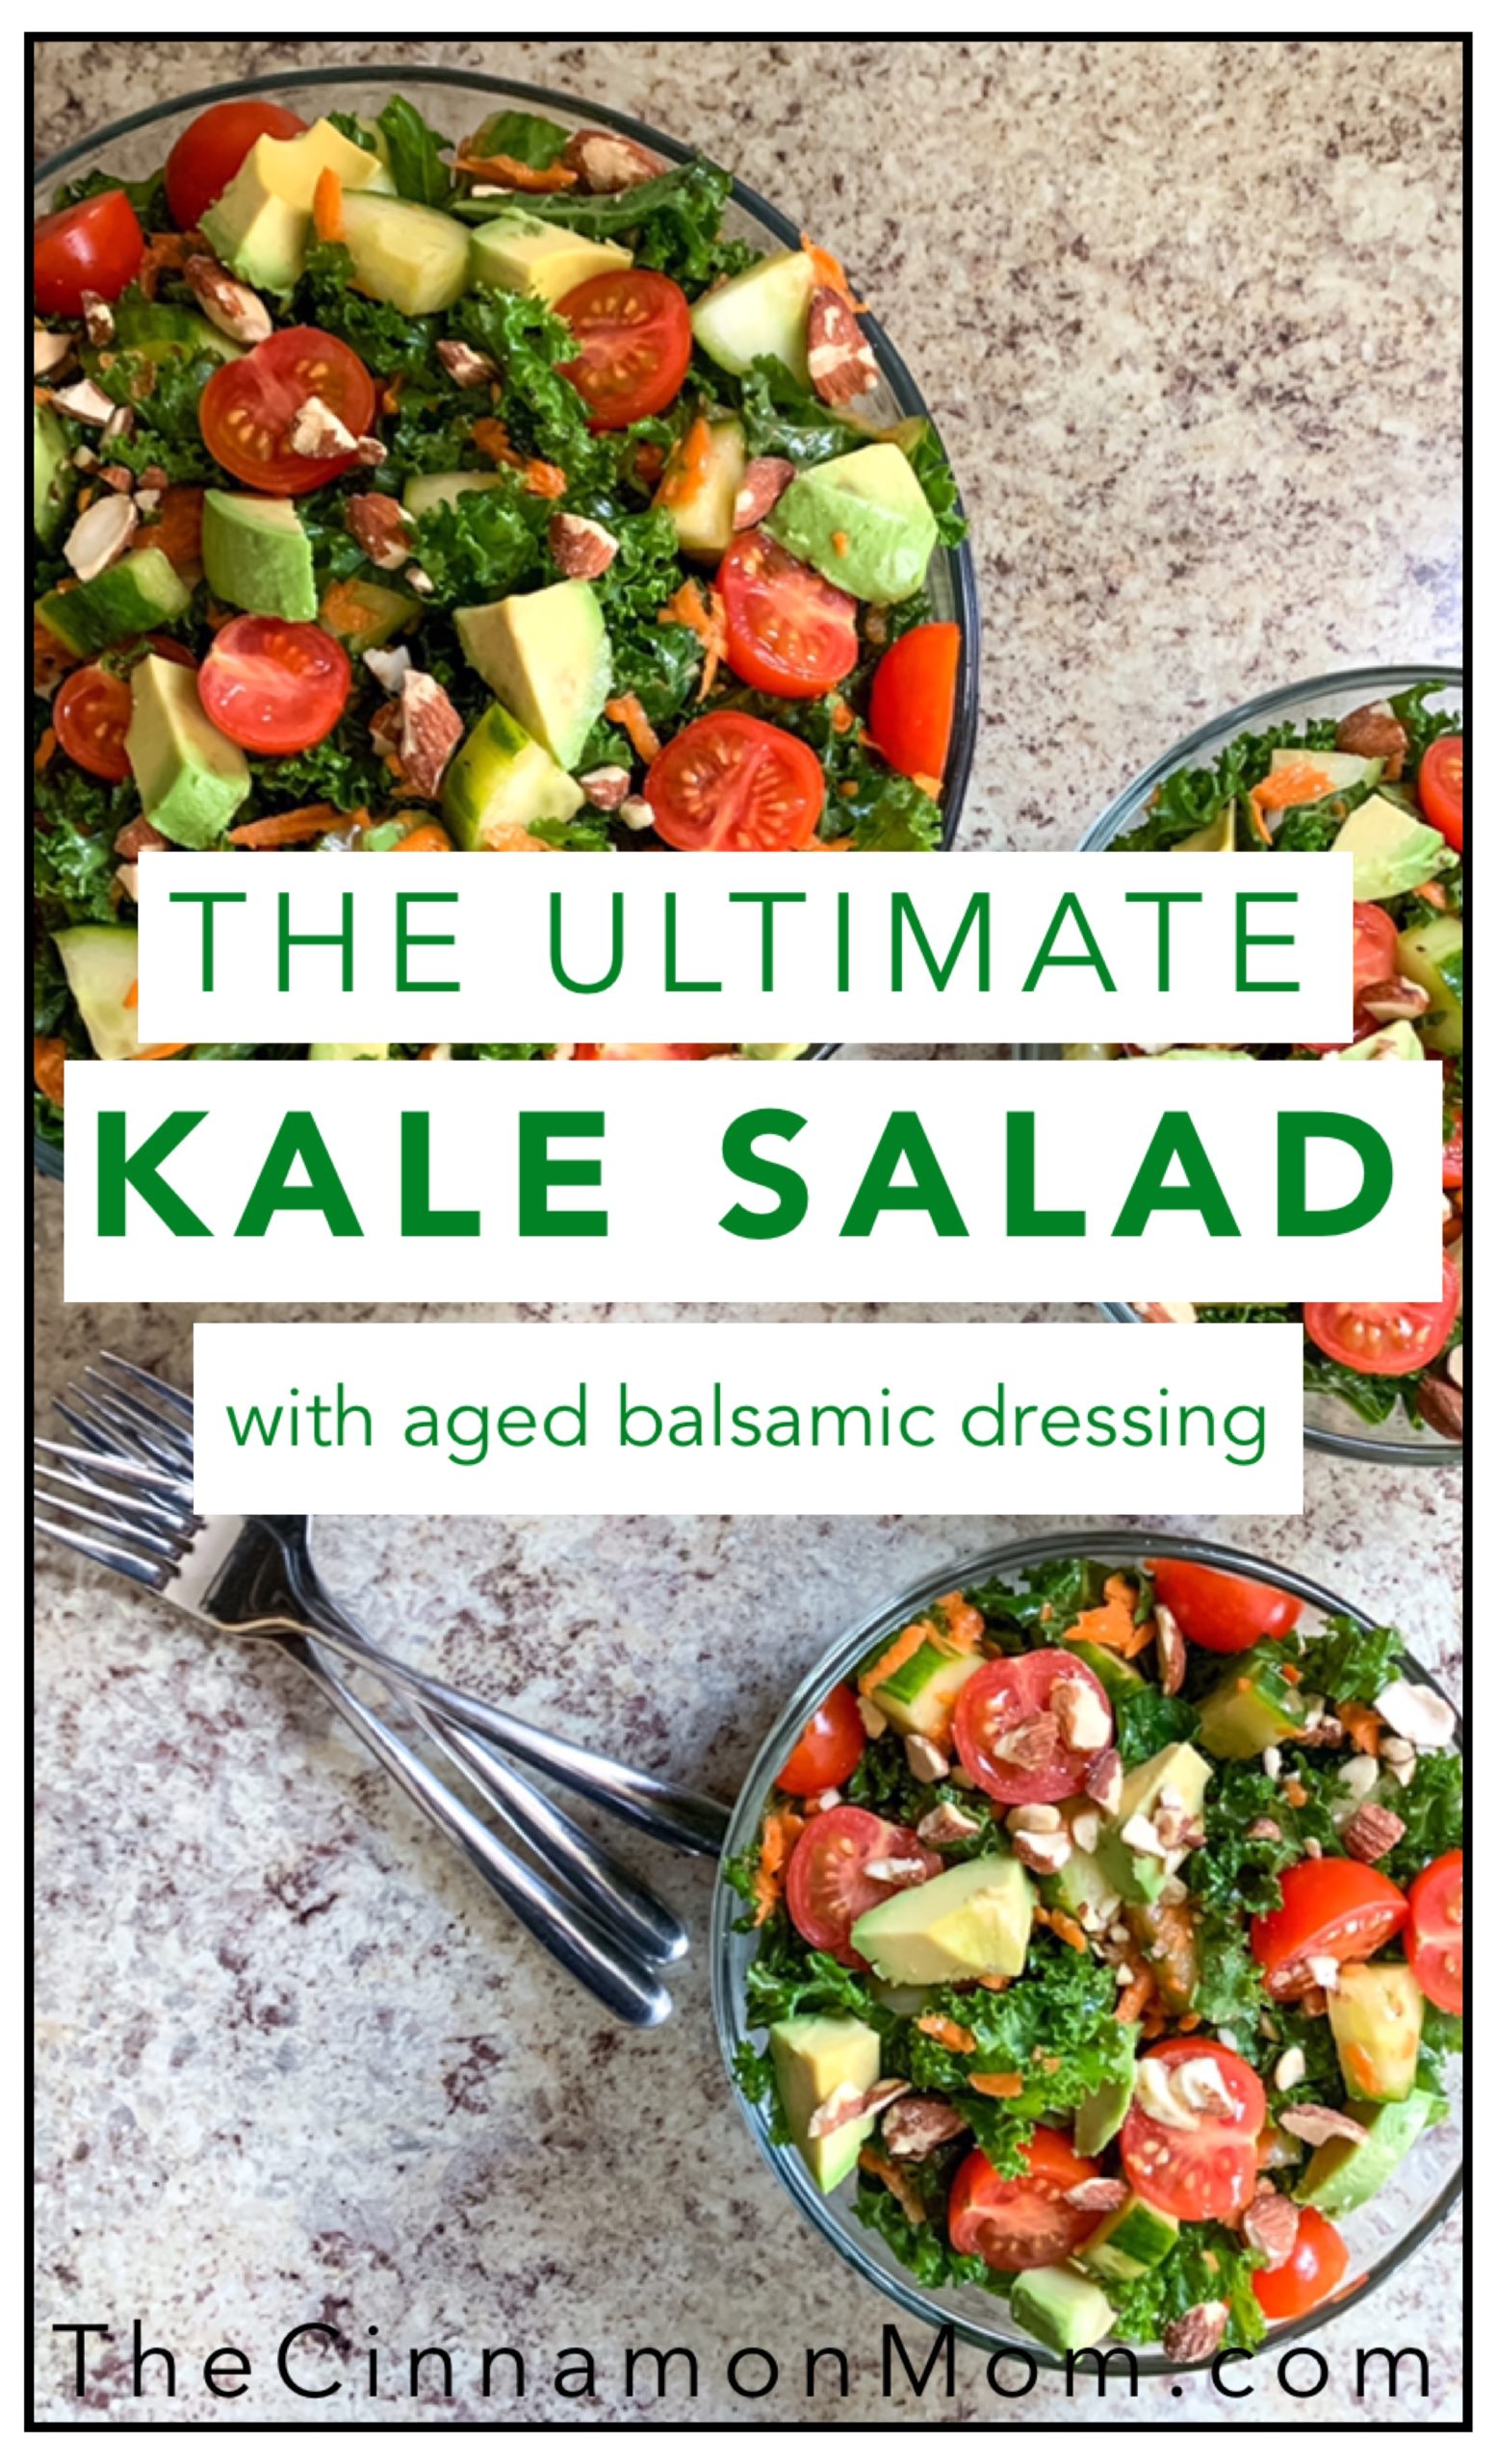 The Ultimate Kale Salad With Aged Balsamic Dressing